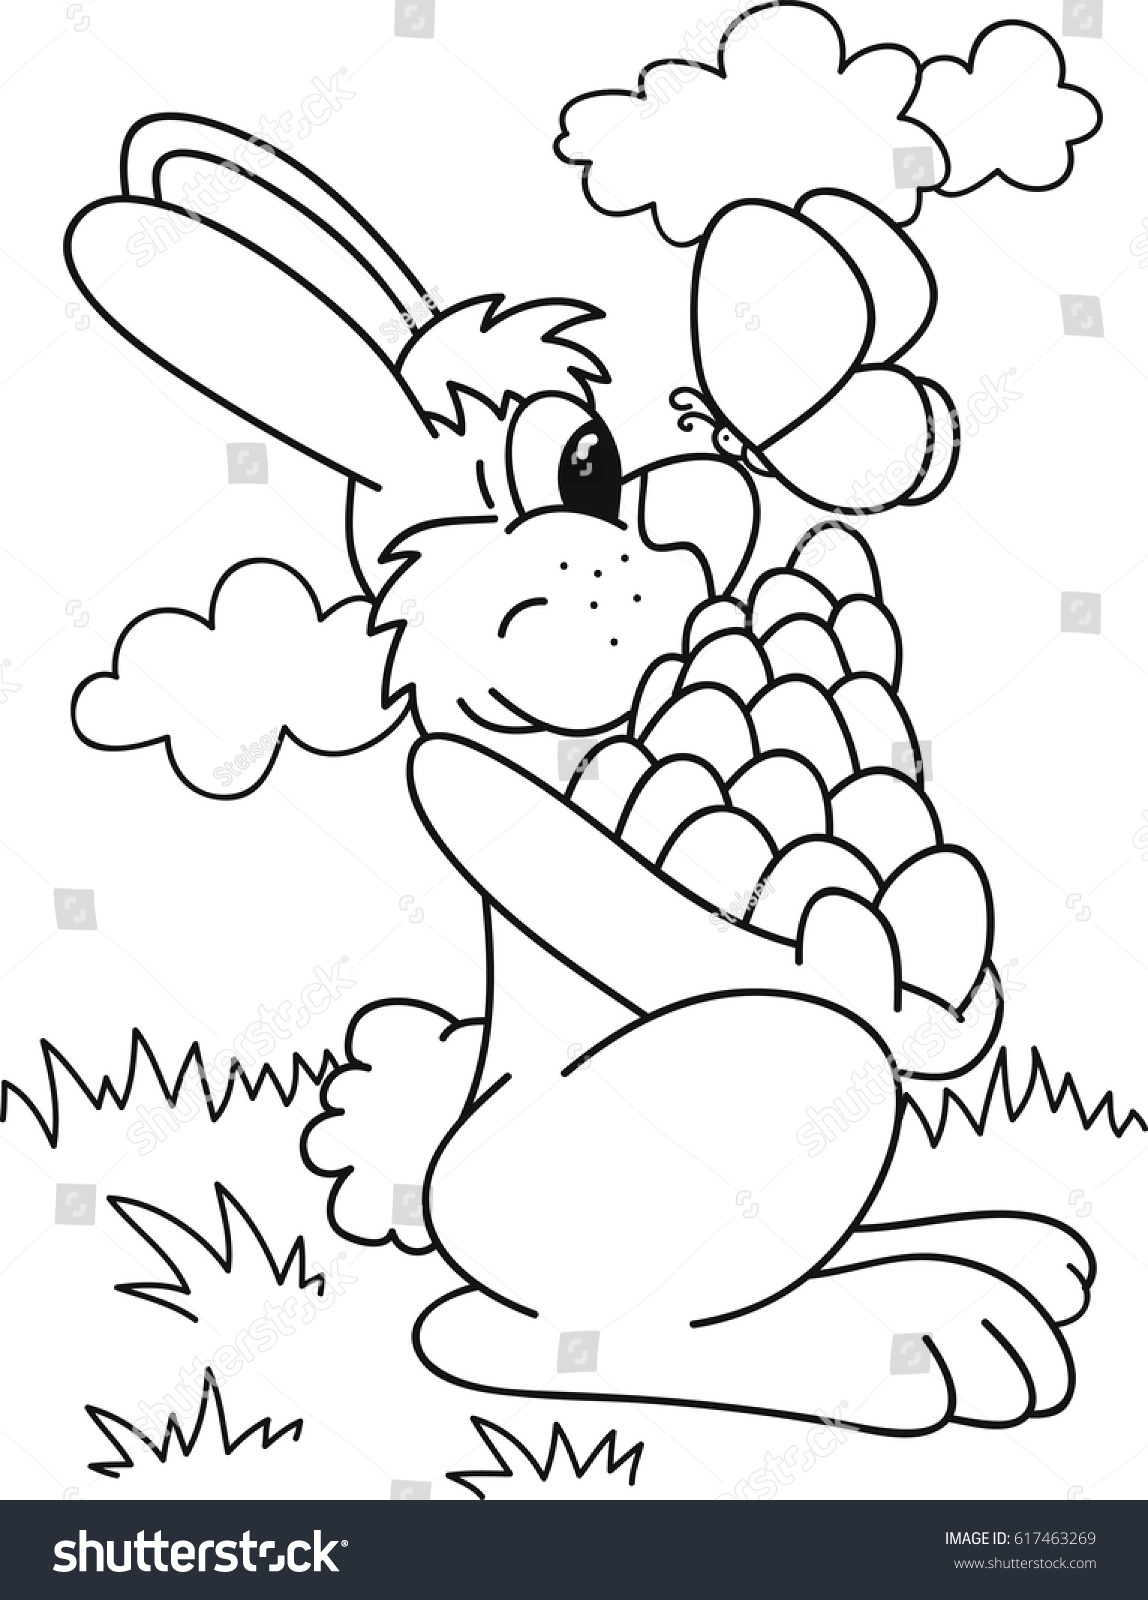 Coloring page outline of cartoon easter bunny with eggs and butterfly Vector illustration coloring